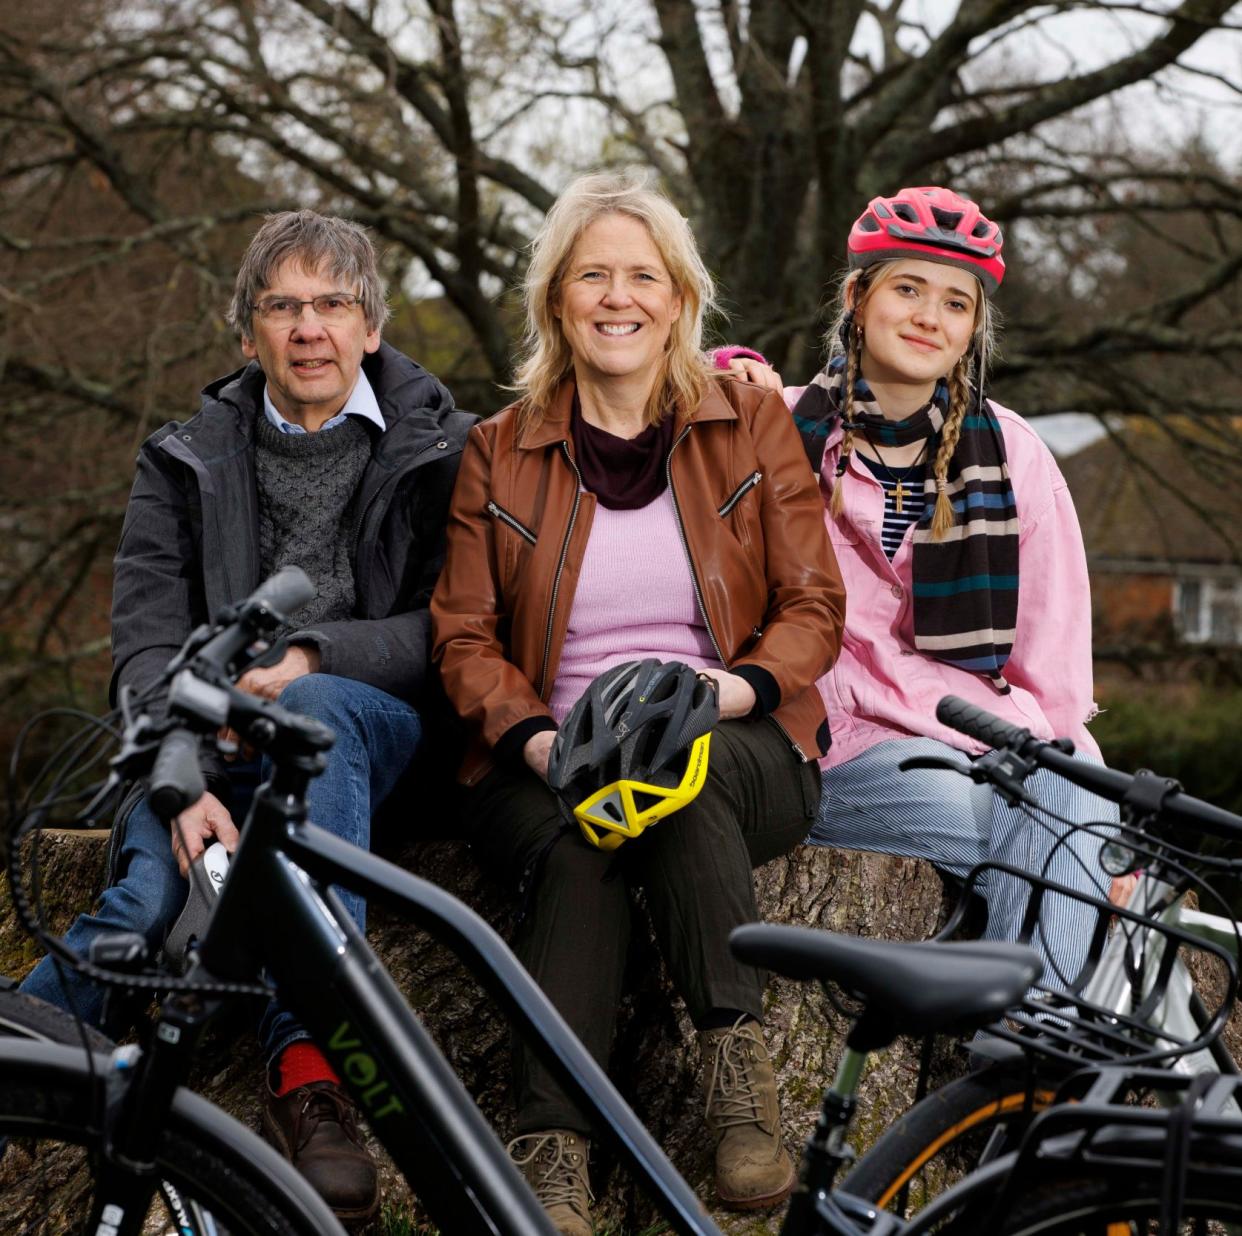 'If anything was going to get my family out cycling, it was a set of bicycles with boost'. says Victoria